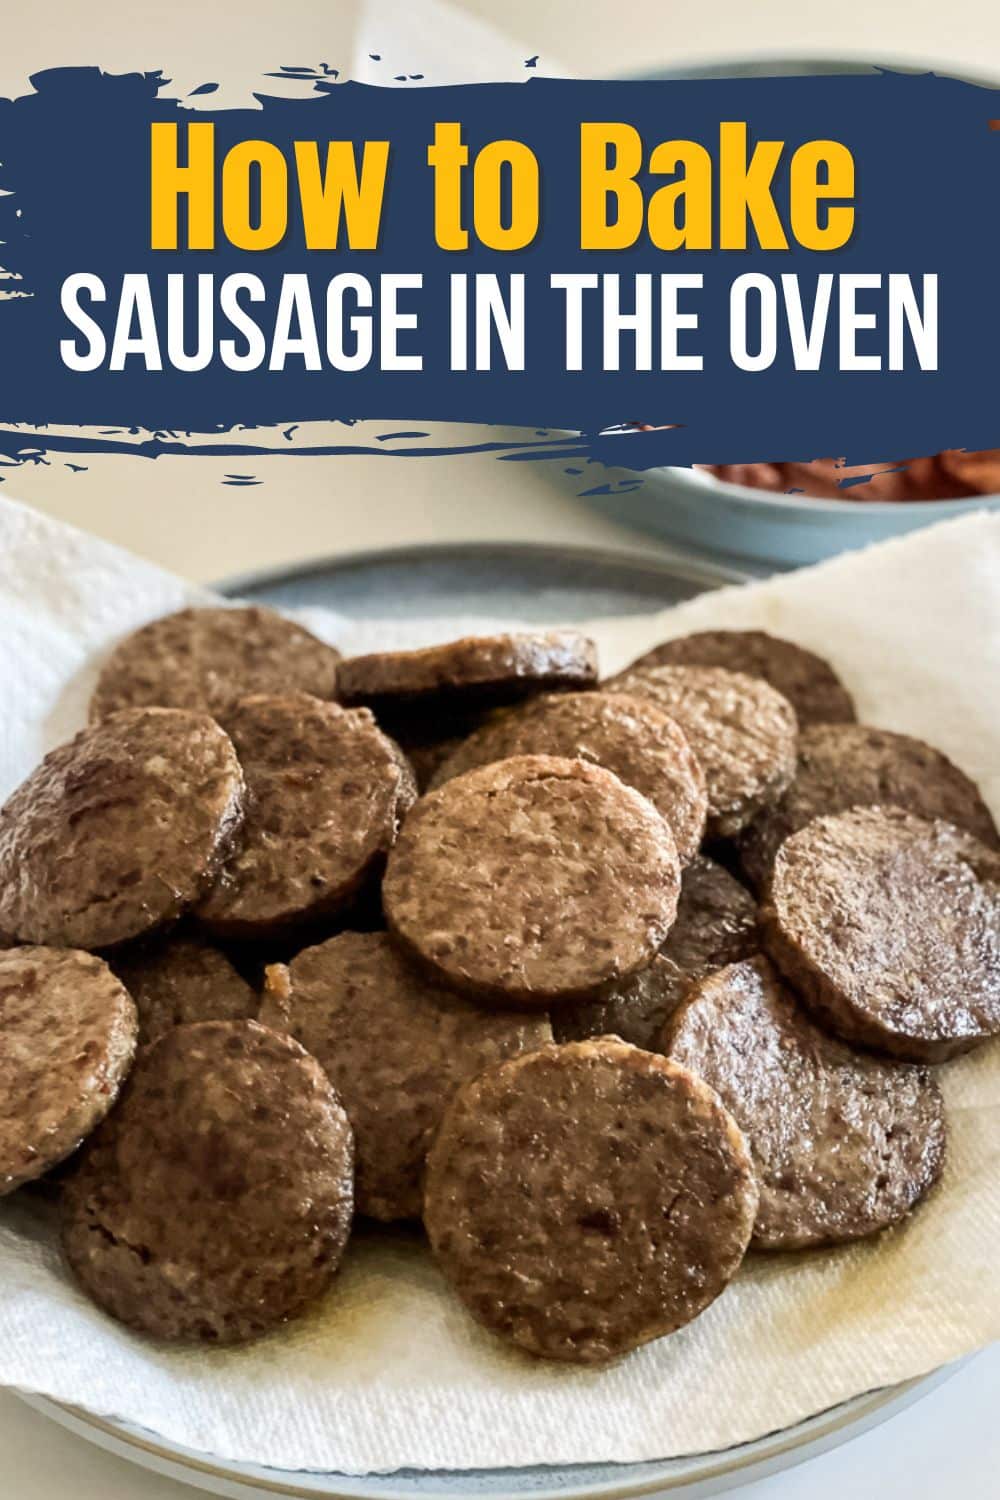 Overhead view of a plate piled high with perfectly cooked sausage patties, with the text "How to Bake Sausage in the Oven" displayed on top of the image.